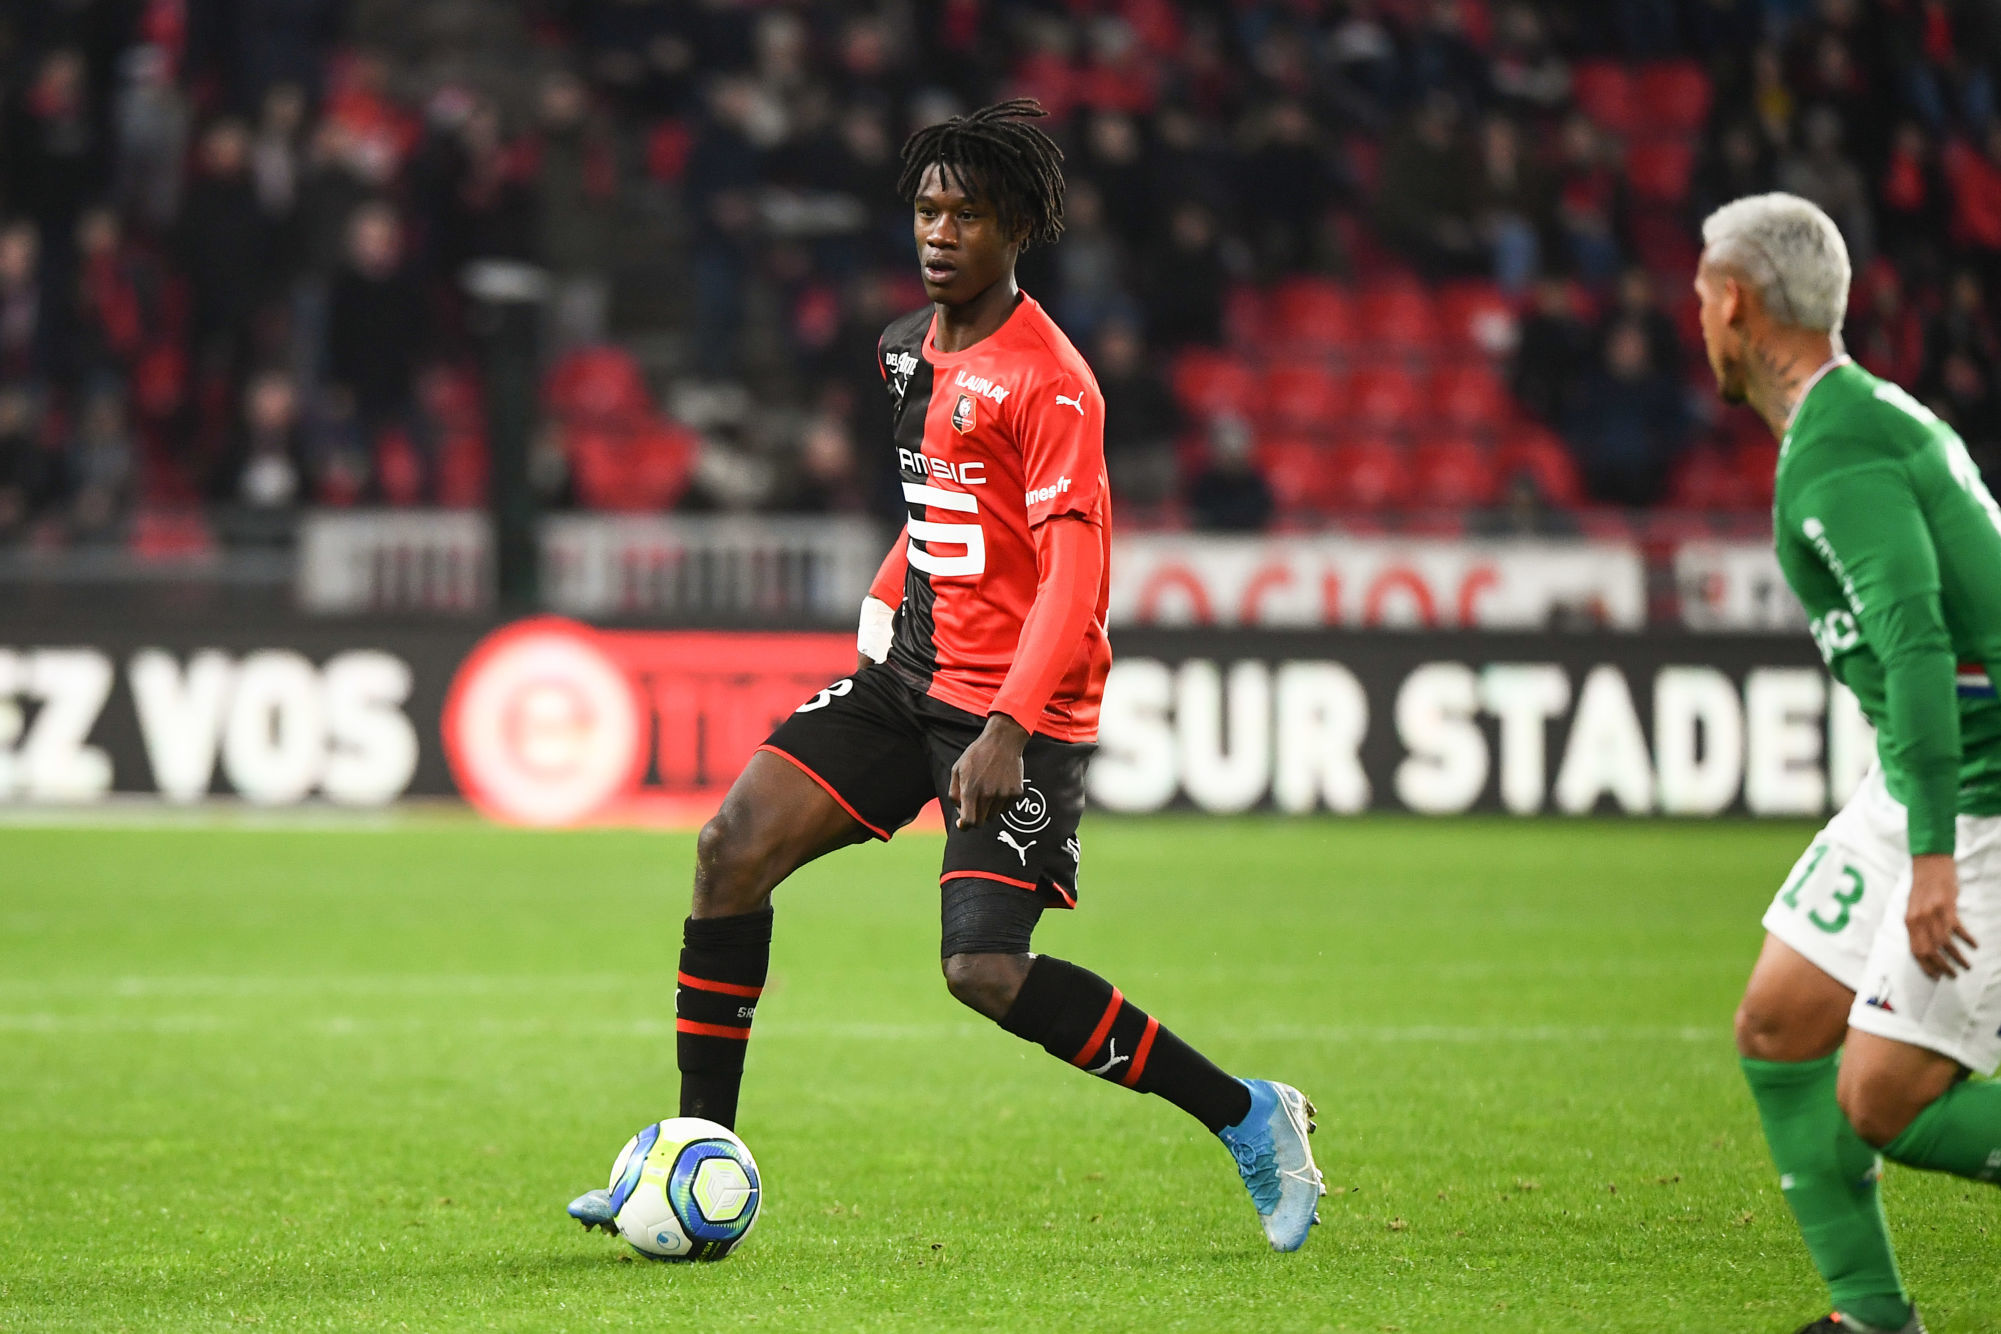 Edouardo CAMAVINGA of Rennes during the Ligue 1 match between Rennes and Saint-Etienne at Roazhon Park on December 1, 2019 in Rennes, France. (Photo by Anthony Dibon/Icon Sport) - Edouardo CAMAVINGA - Roazhon Park - Rennes (France)